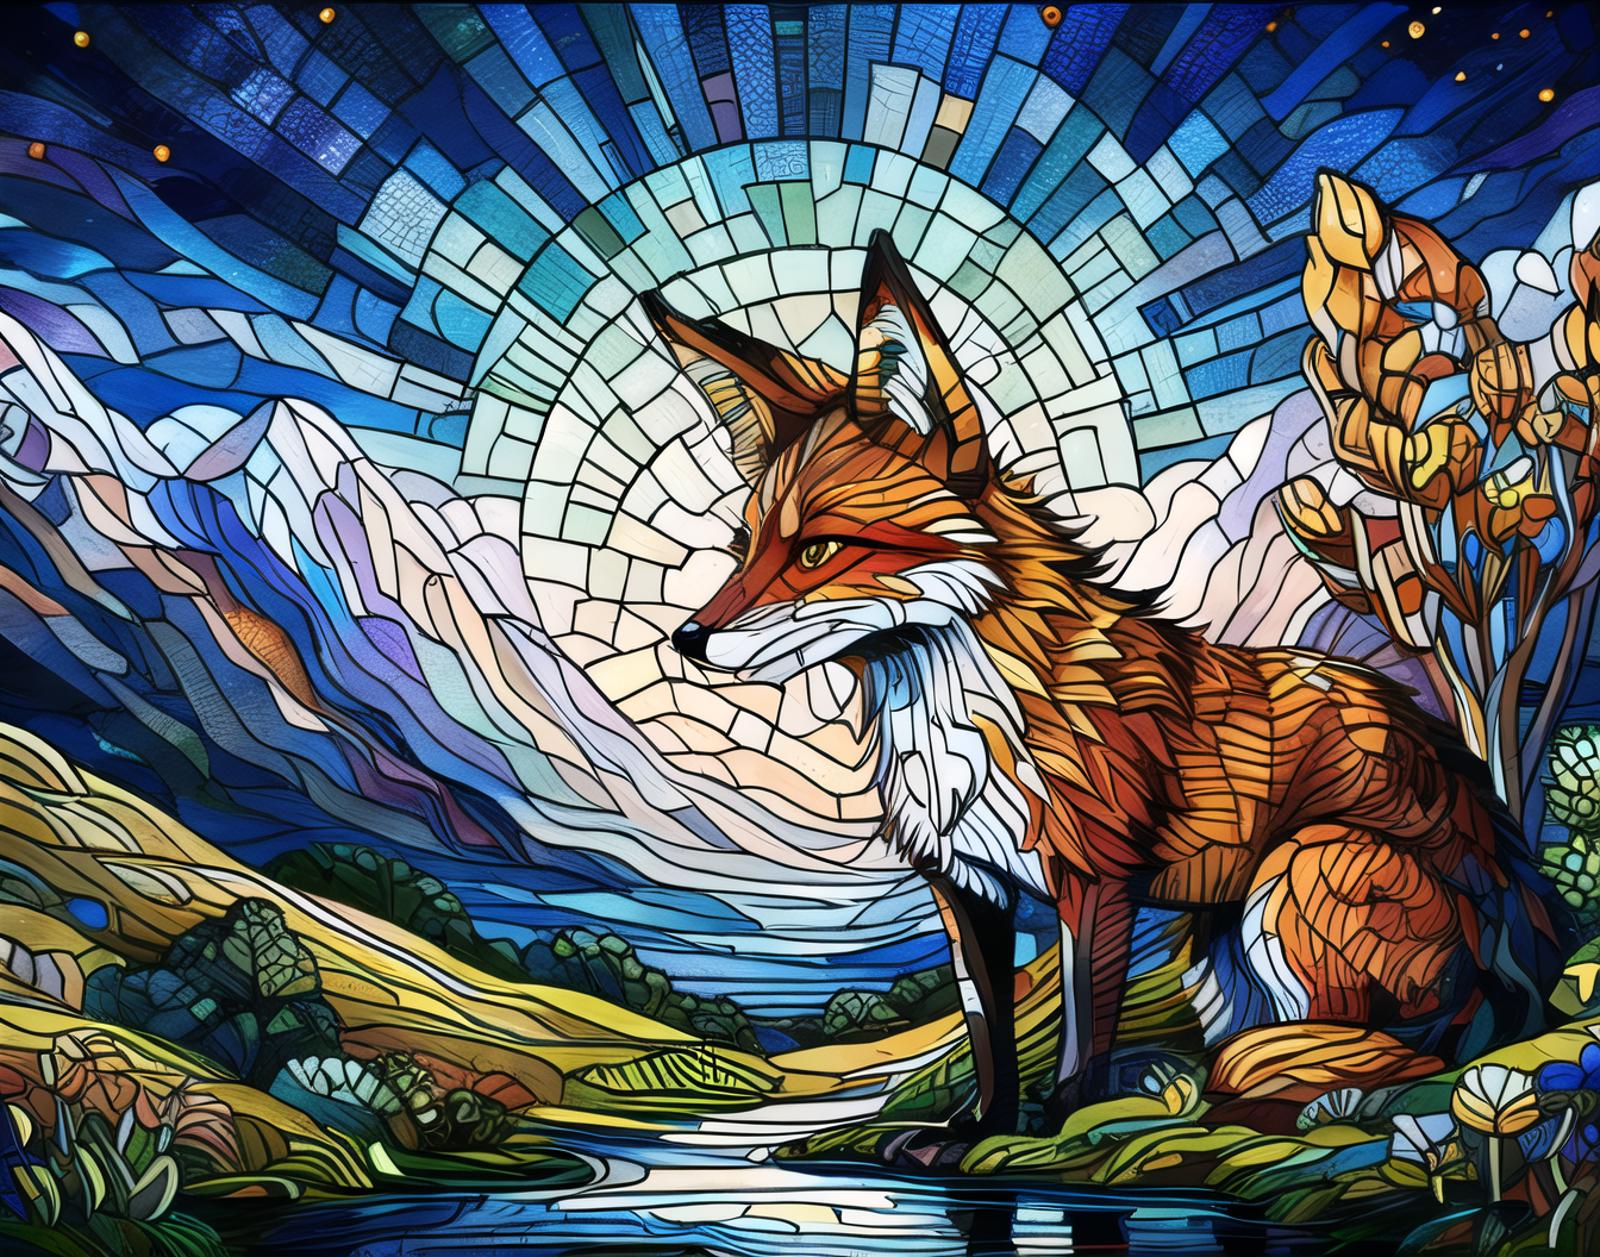 Stained Glass Fox With Striking Yellow Eyes and Brown Body, Set in a Mountainous Landscape